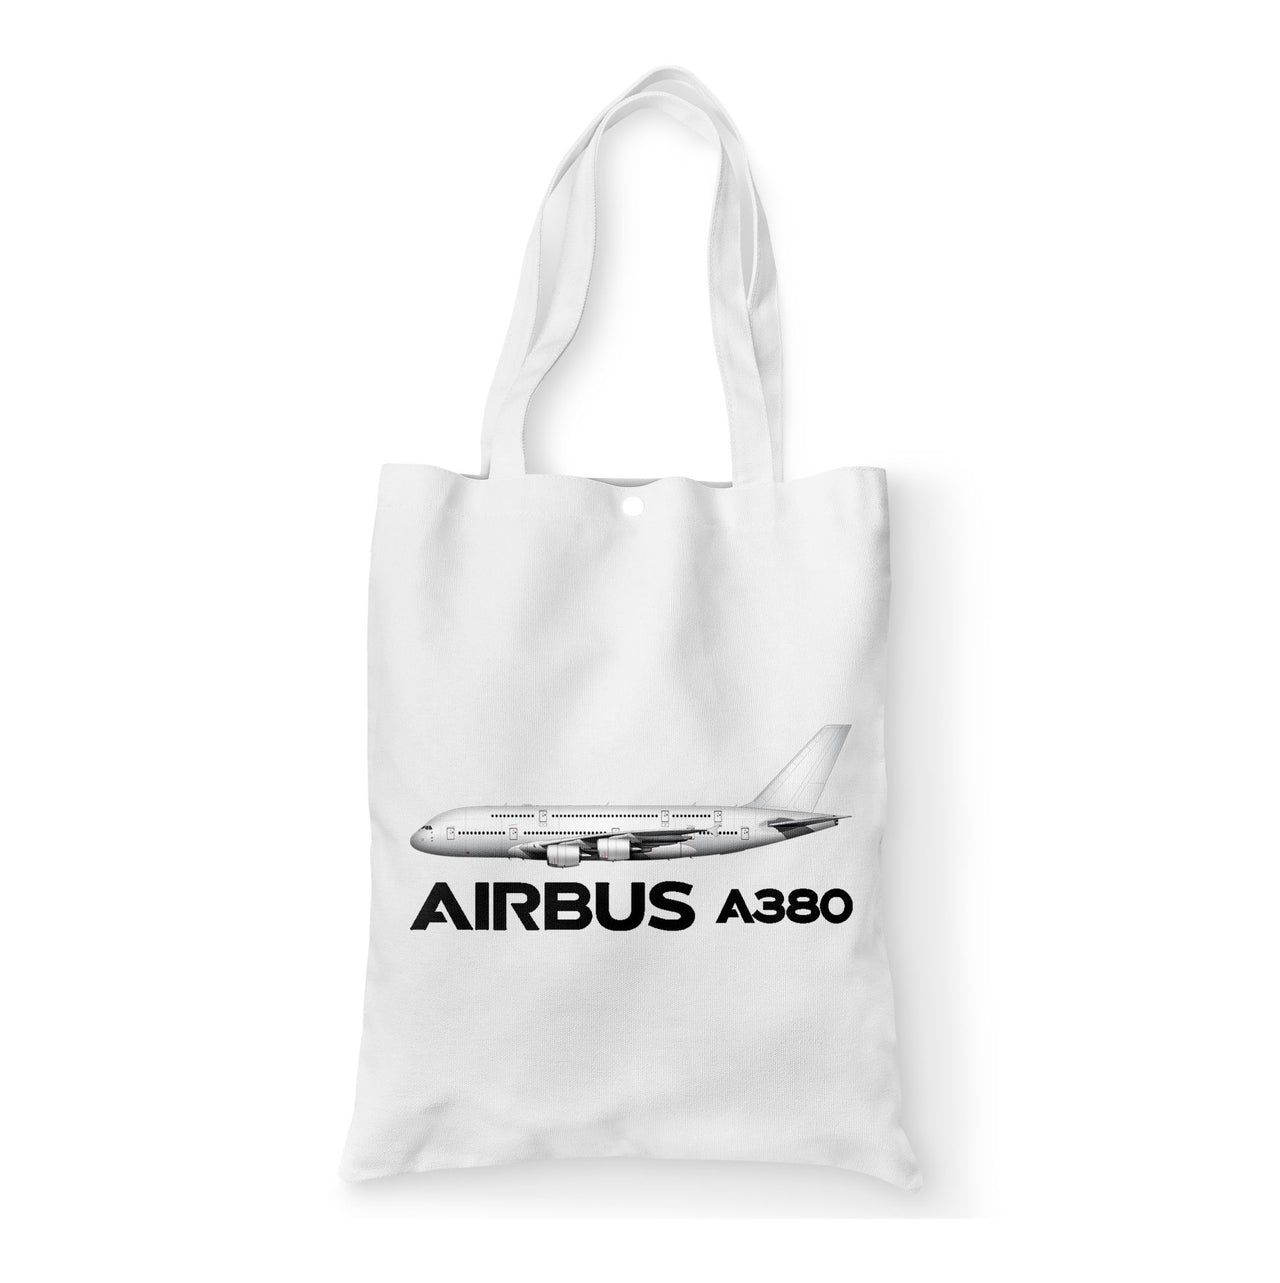 The Airbus A380 Designed Tote Bags